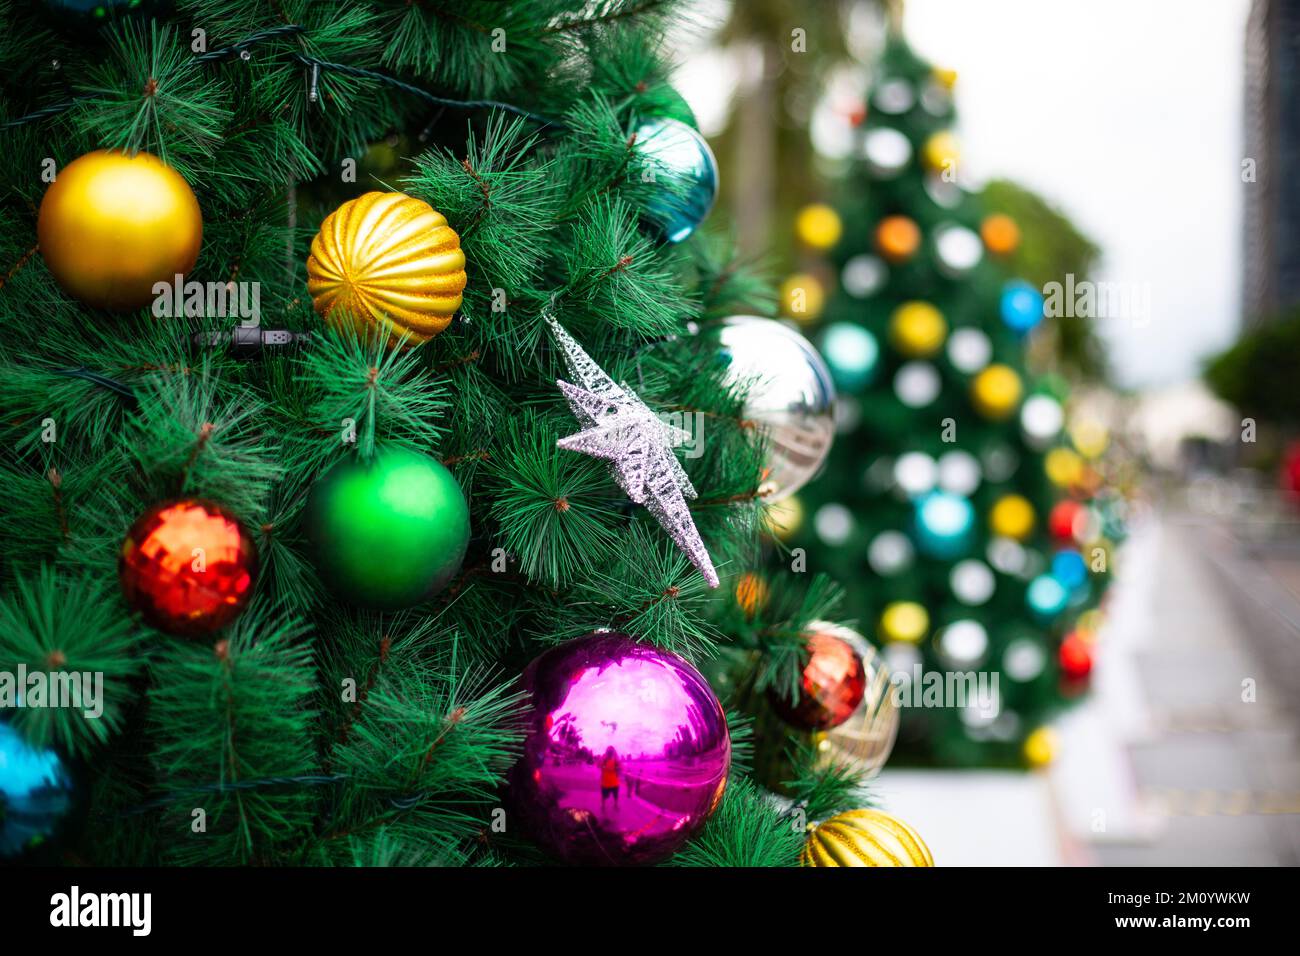 Rich colouful Christmas trees decoration at outdoor venue in Singapore Stock Photo